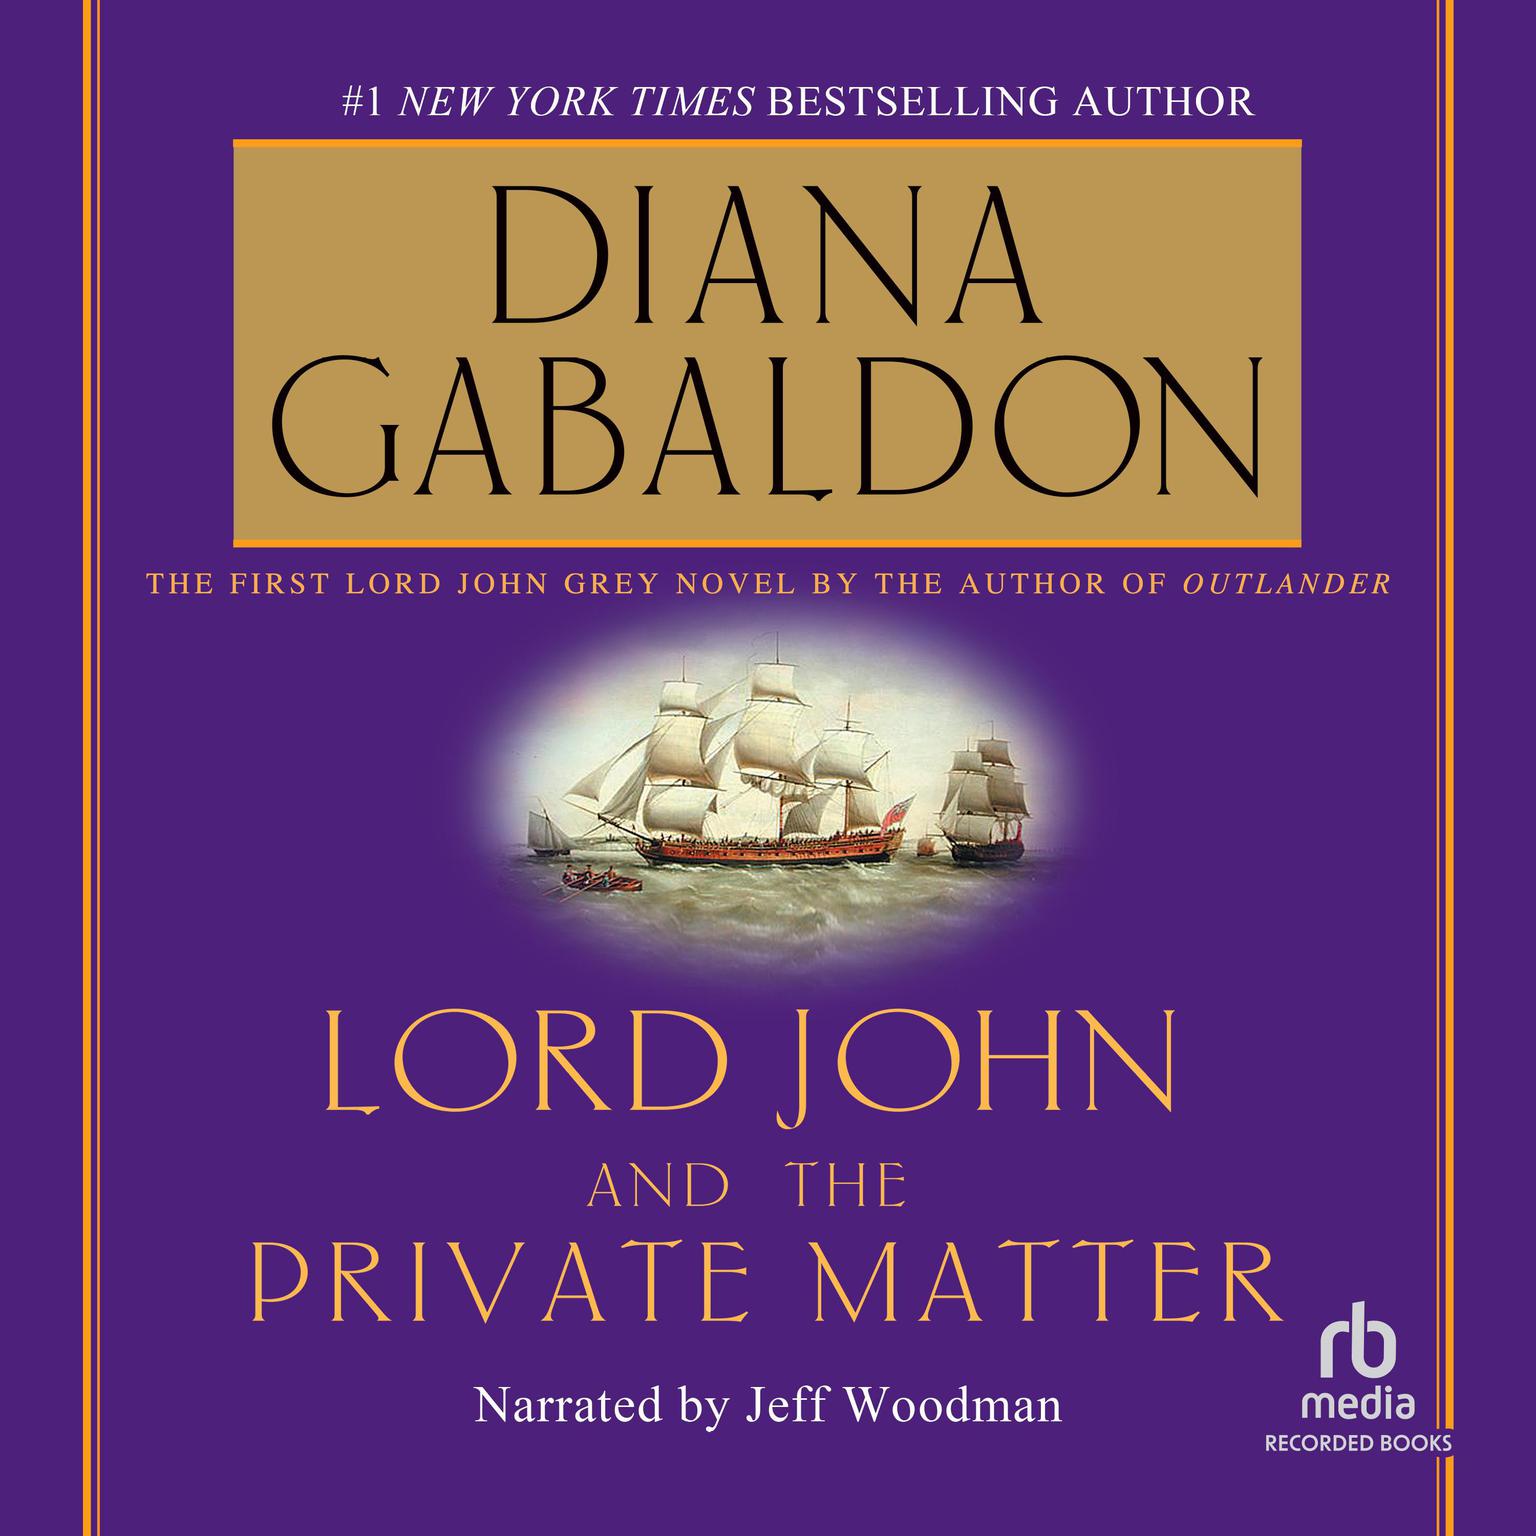 Lord John and the Private Matter Audiobook, by Diana Gabaldon